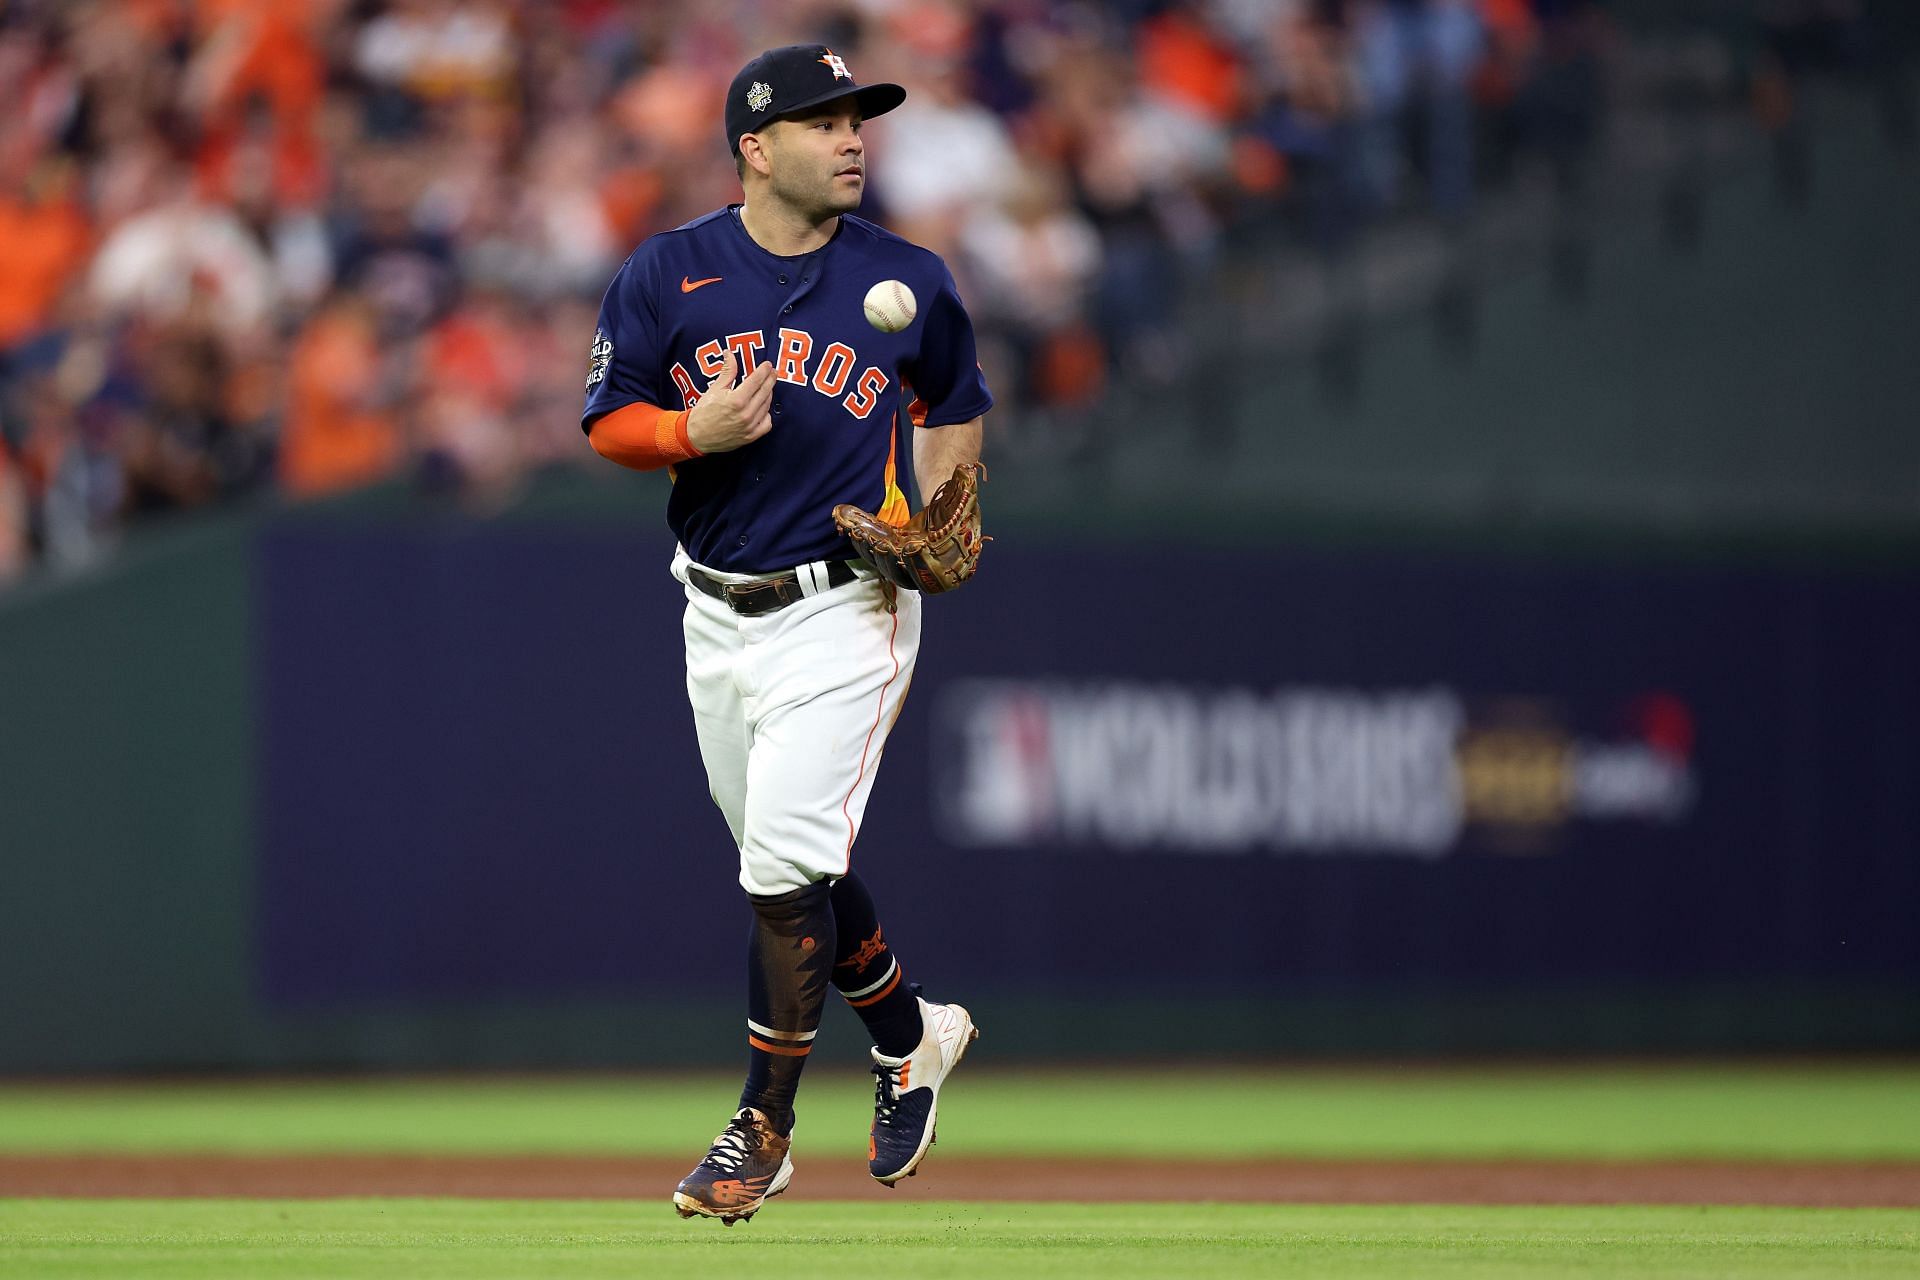 Everyone needs to see Jose Altuve's 'unfinished tattoo' that